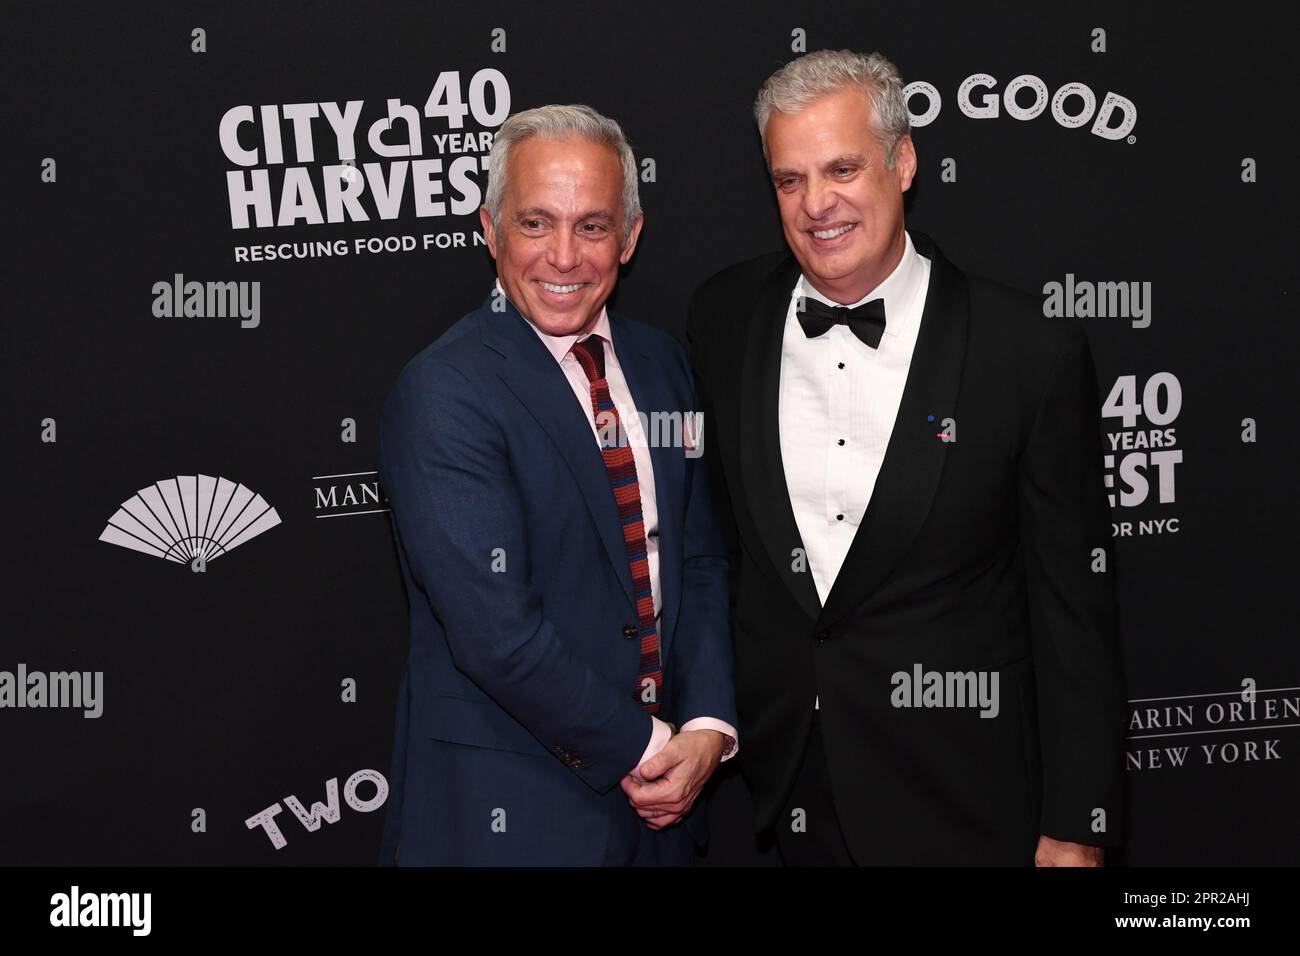 https://c8.alamy.com/comp/2PR2AHJ/new-york-usa-25th-apr-2023-geoffrey-zakarian-and-eric-ripert-attend-the-city-harvest-40th-anniversary-gala-house-of-harvest-at-cipriani-42nd-street-in-new-york-ny-on-april-25-2023-photo-by-efren-landaossipa-usa-credit-sipa-usaalamy-live-news-2PR2AHJ.jpg